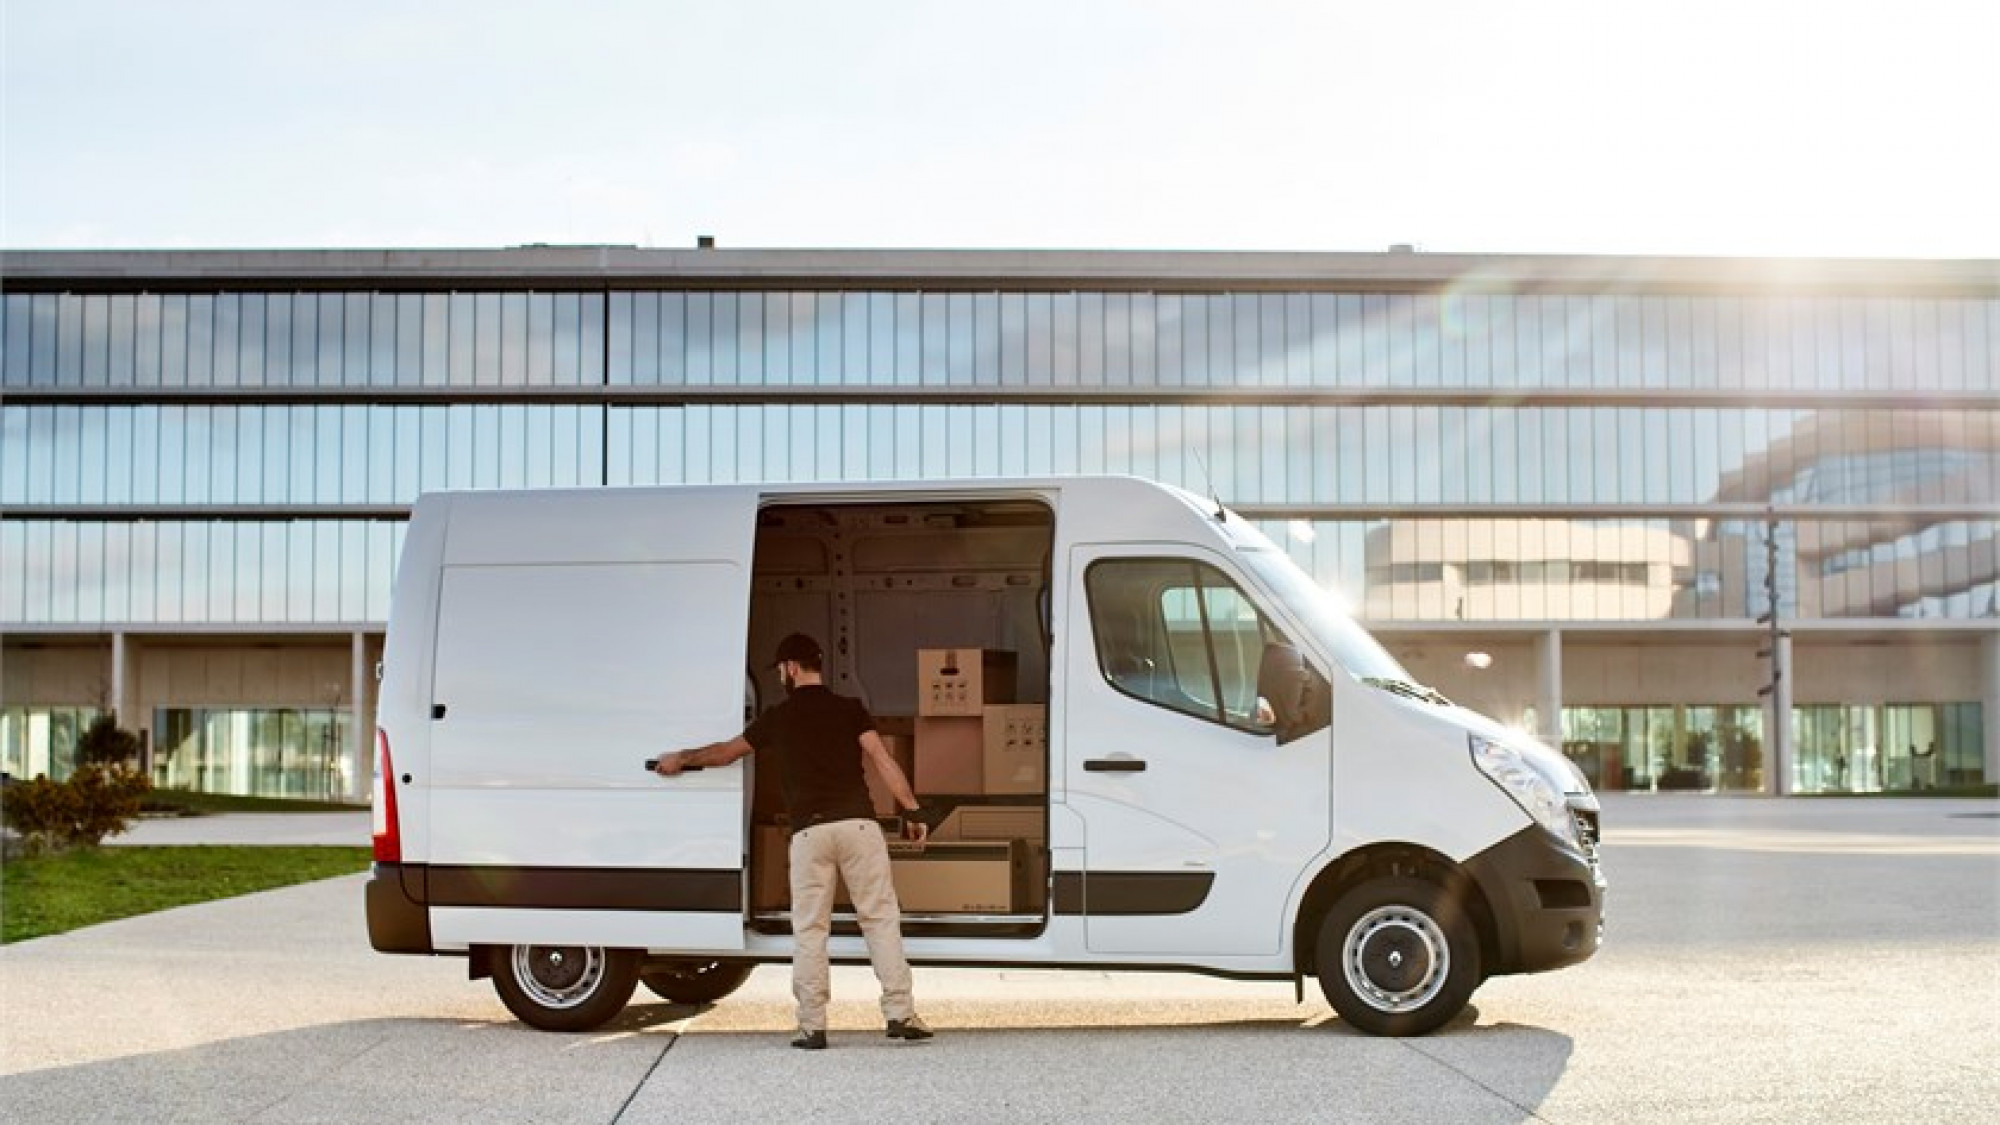 21204458 2018 Renault Master Z E tests drive and electric LCV range in Lisboa